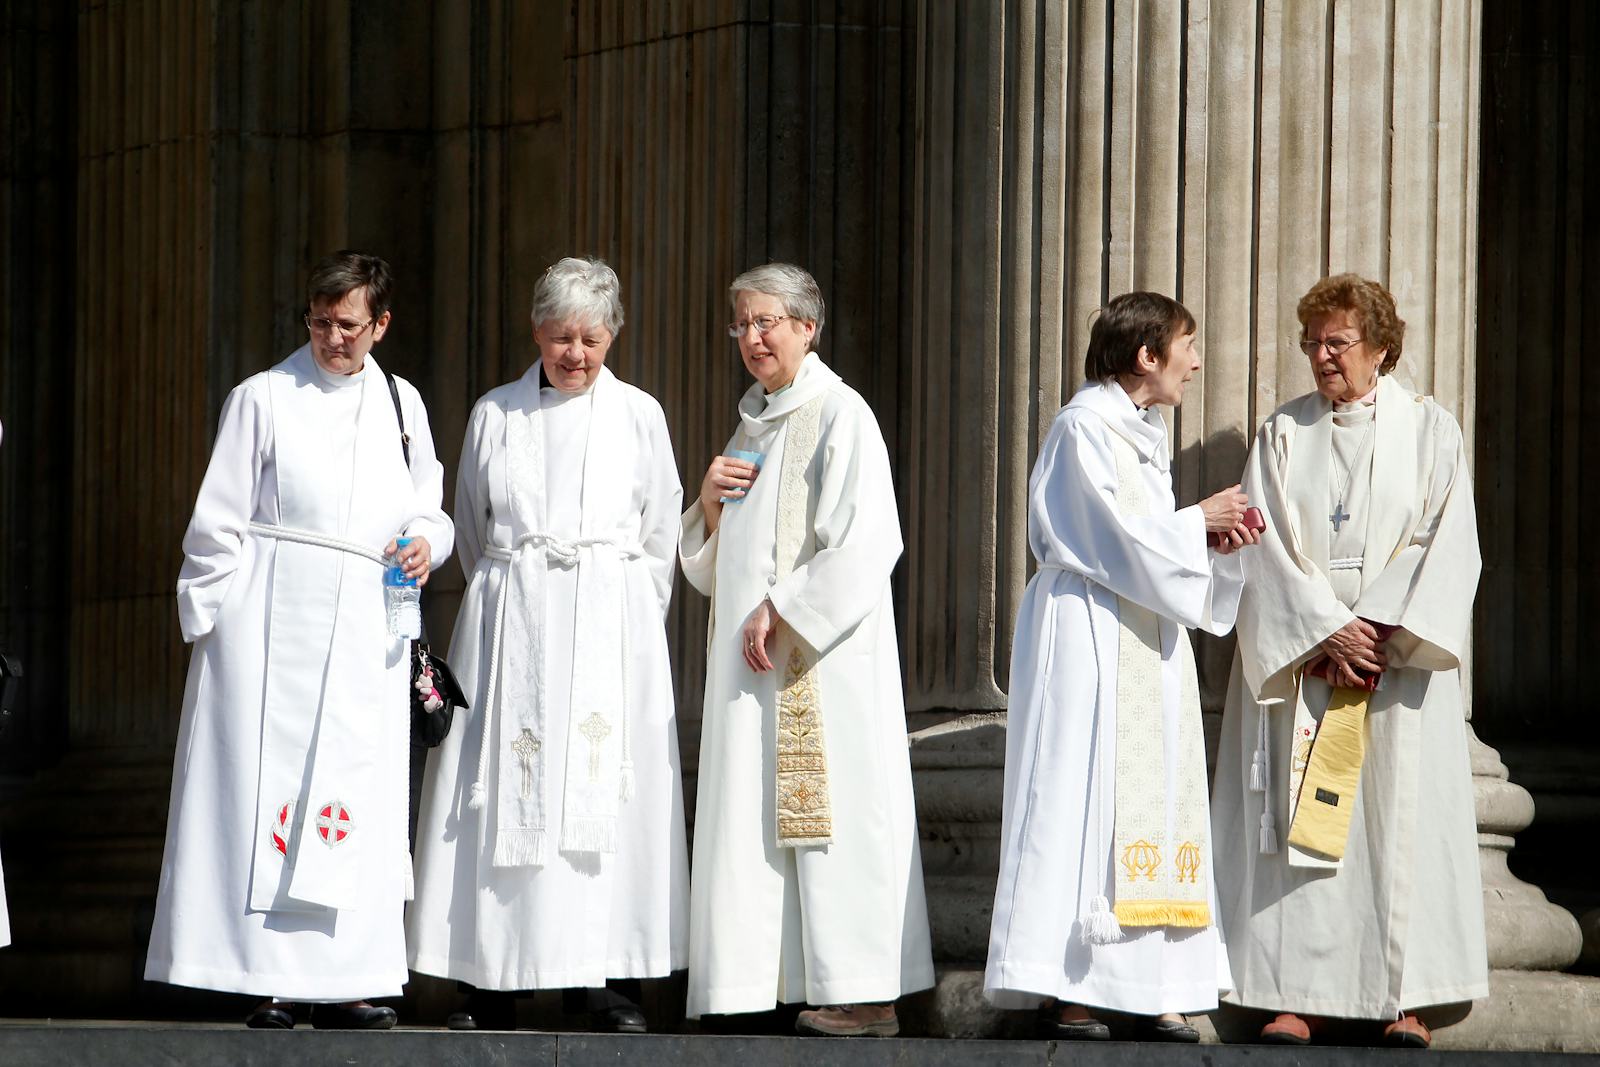 Roman Catholic Women Priests Are Appointing Themselves The Role The ...